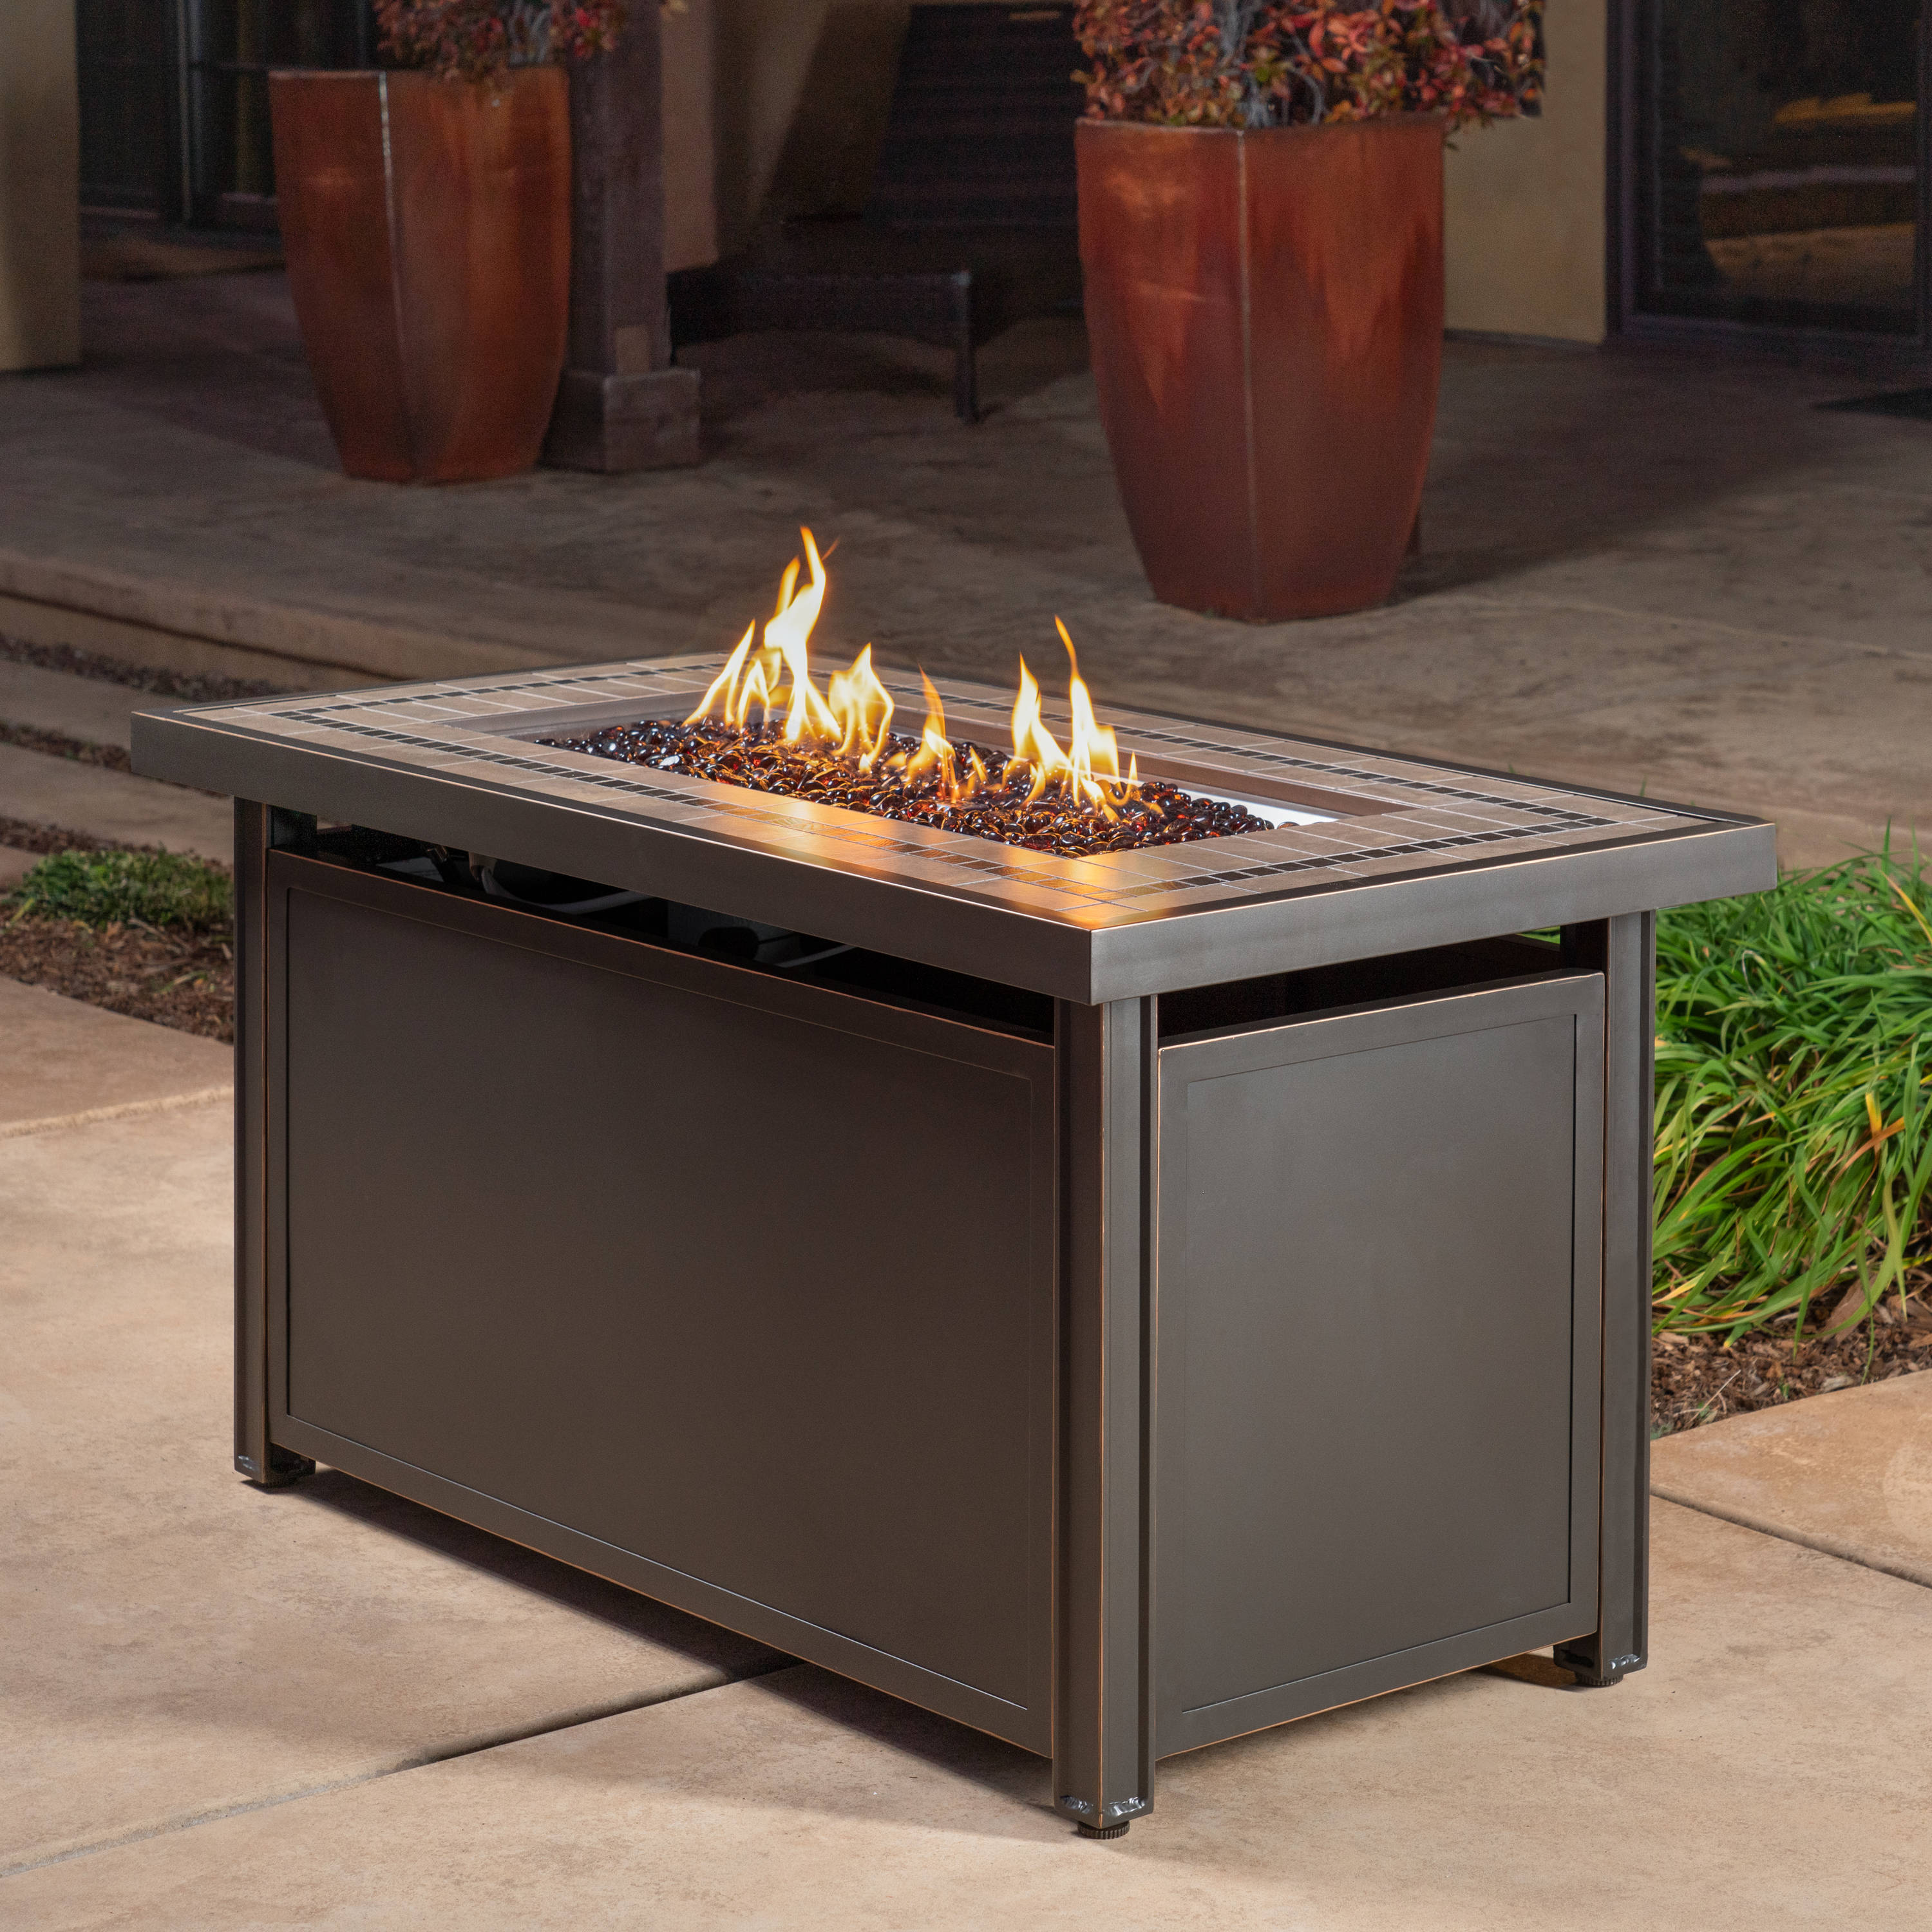 Gas Fire Pits Department At, Uniflame Lp Gas Ceramic Tile Fire Pit Table